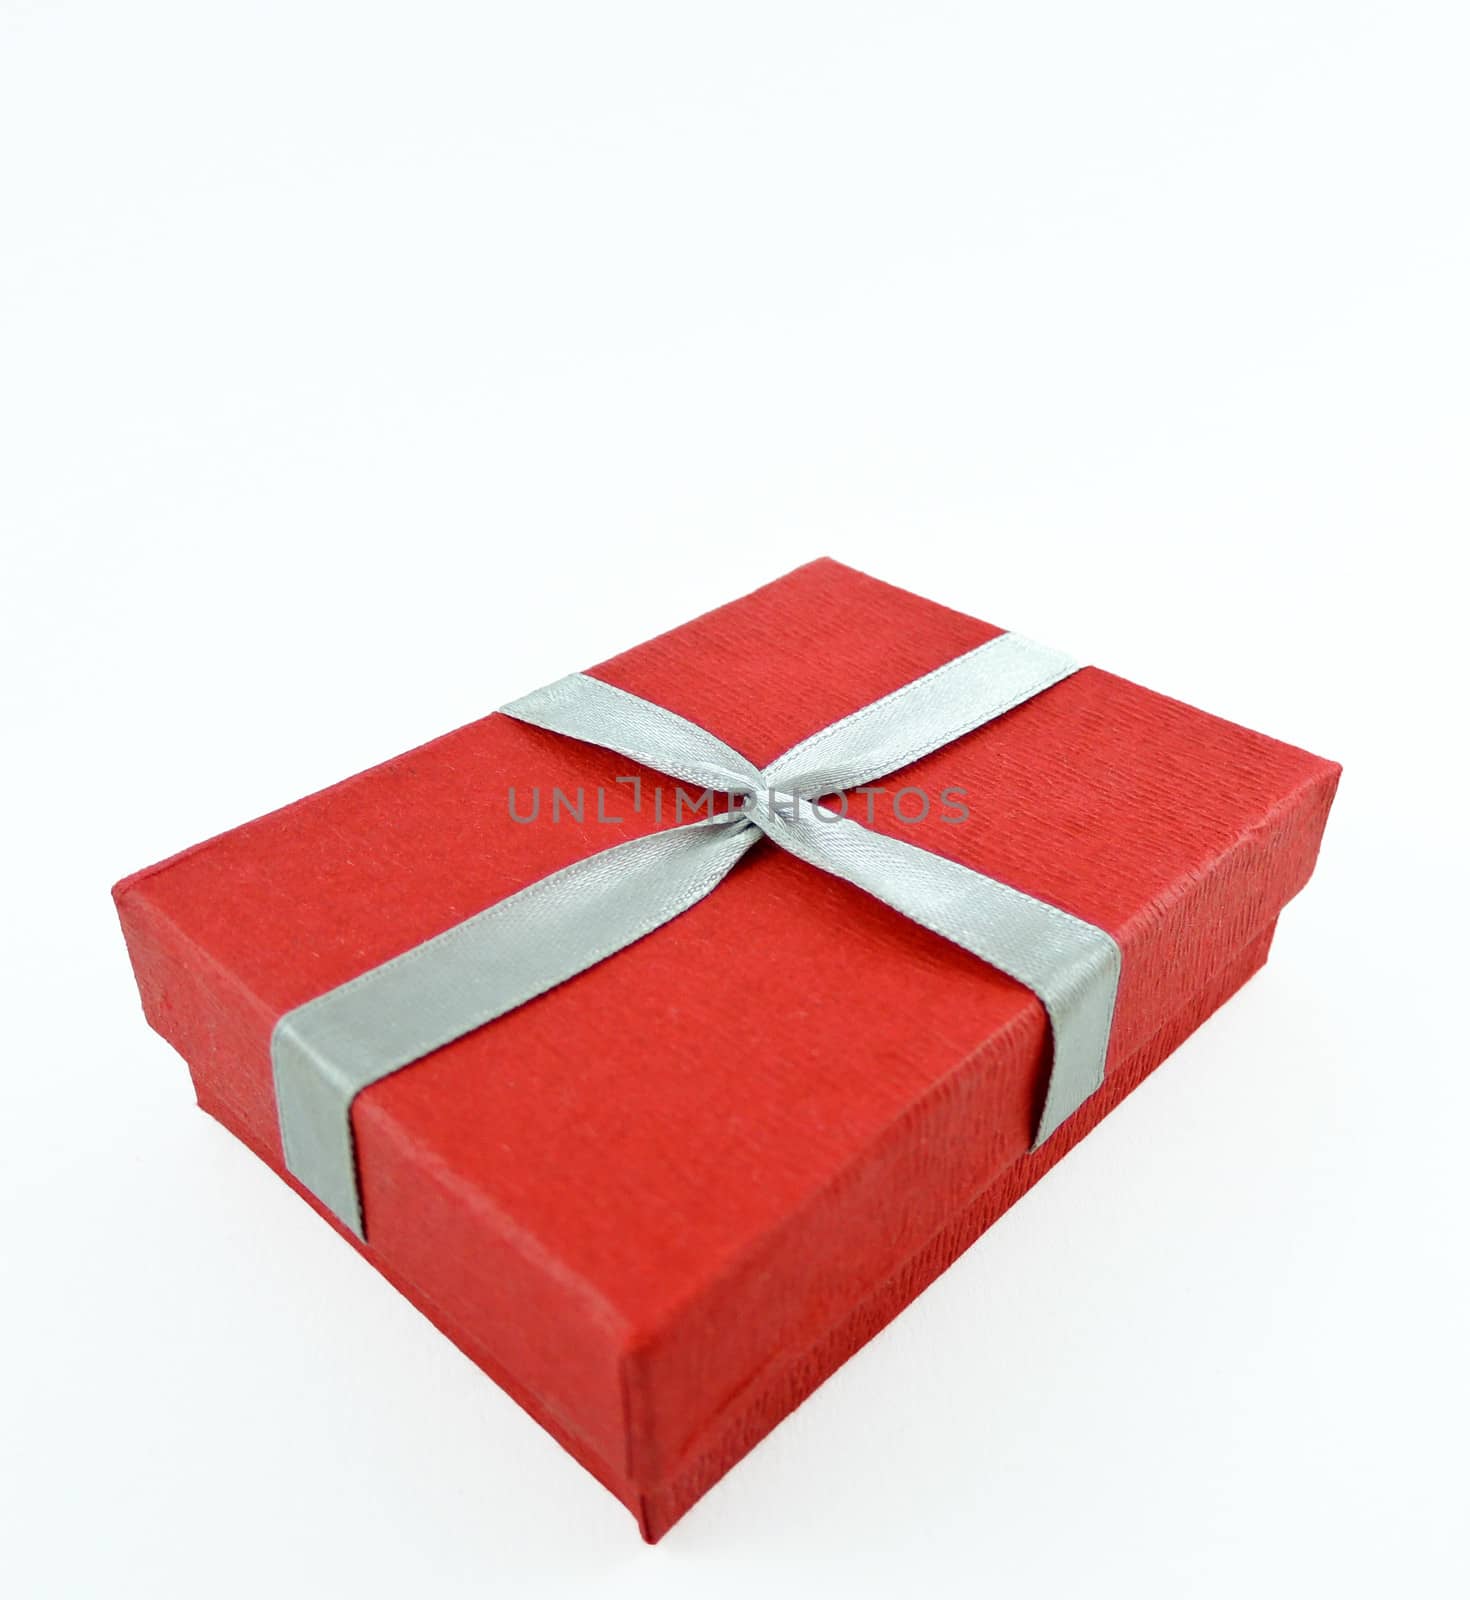 Red box and ribbon on white backgrounds by MalyDesigner